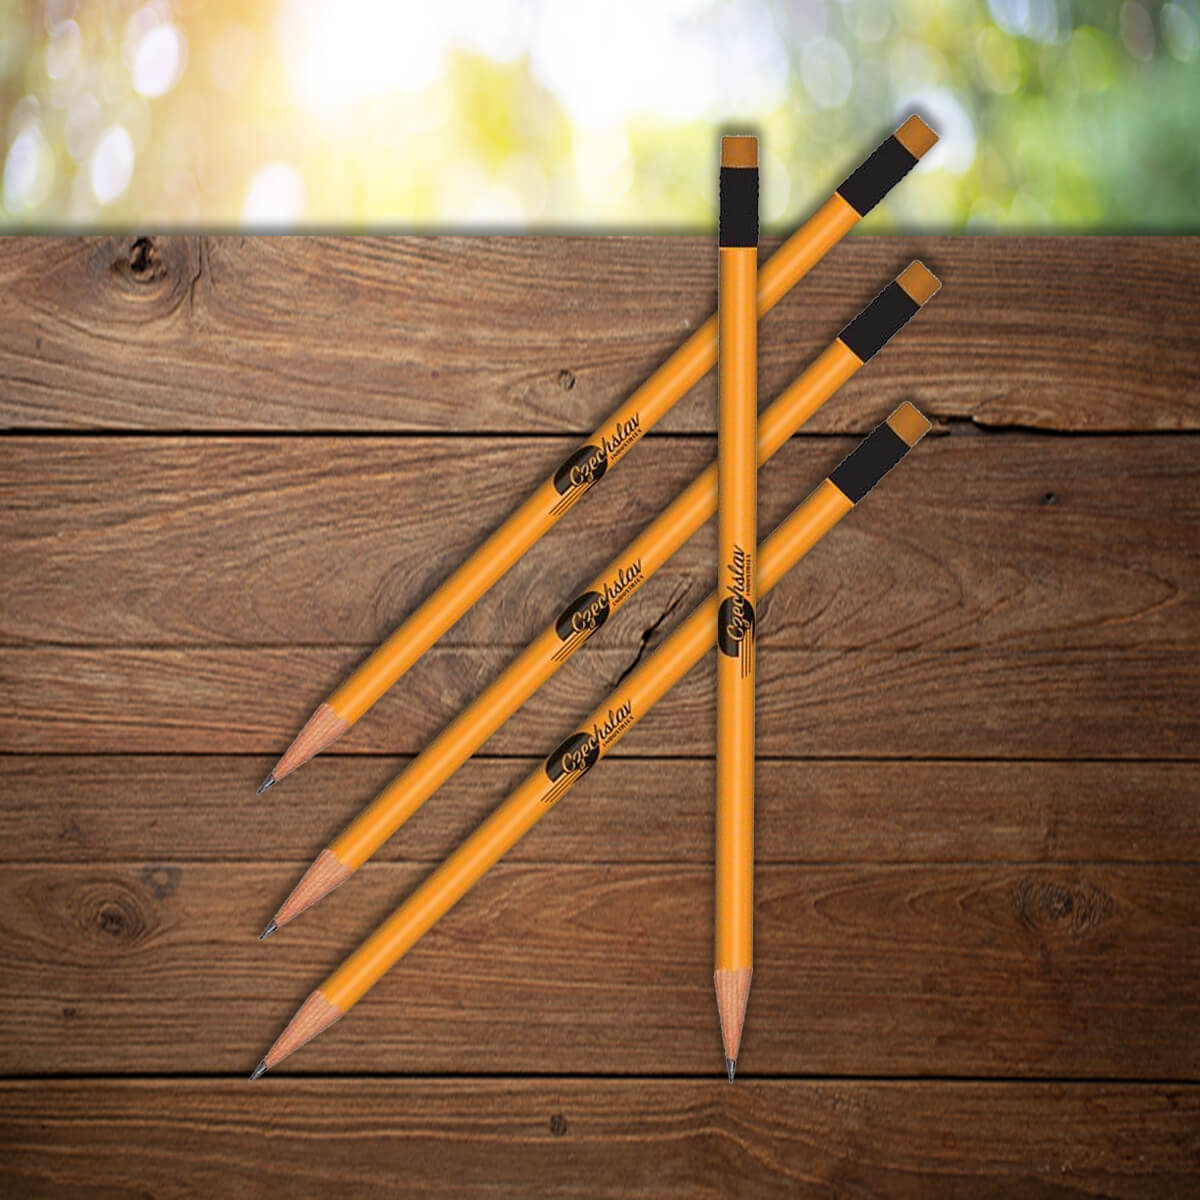 Orange with black imprint shown on custom pencils promotional writing implements by curative printing